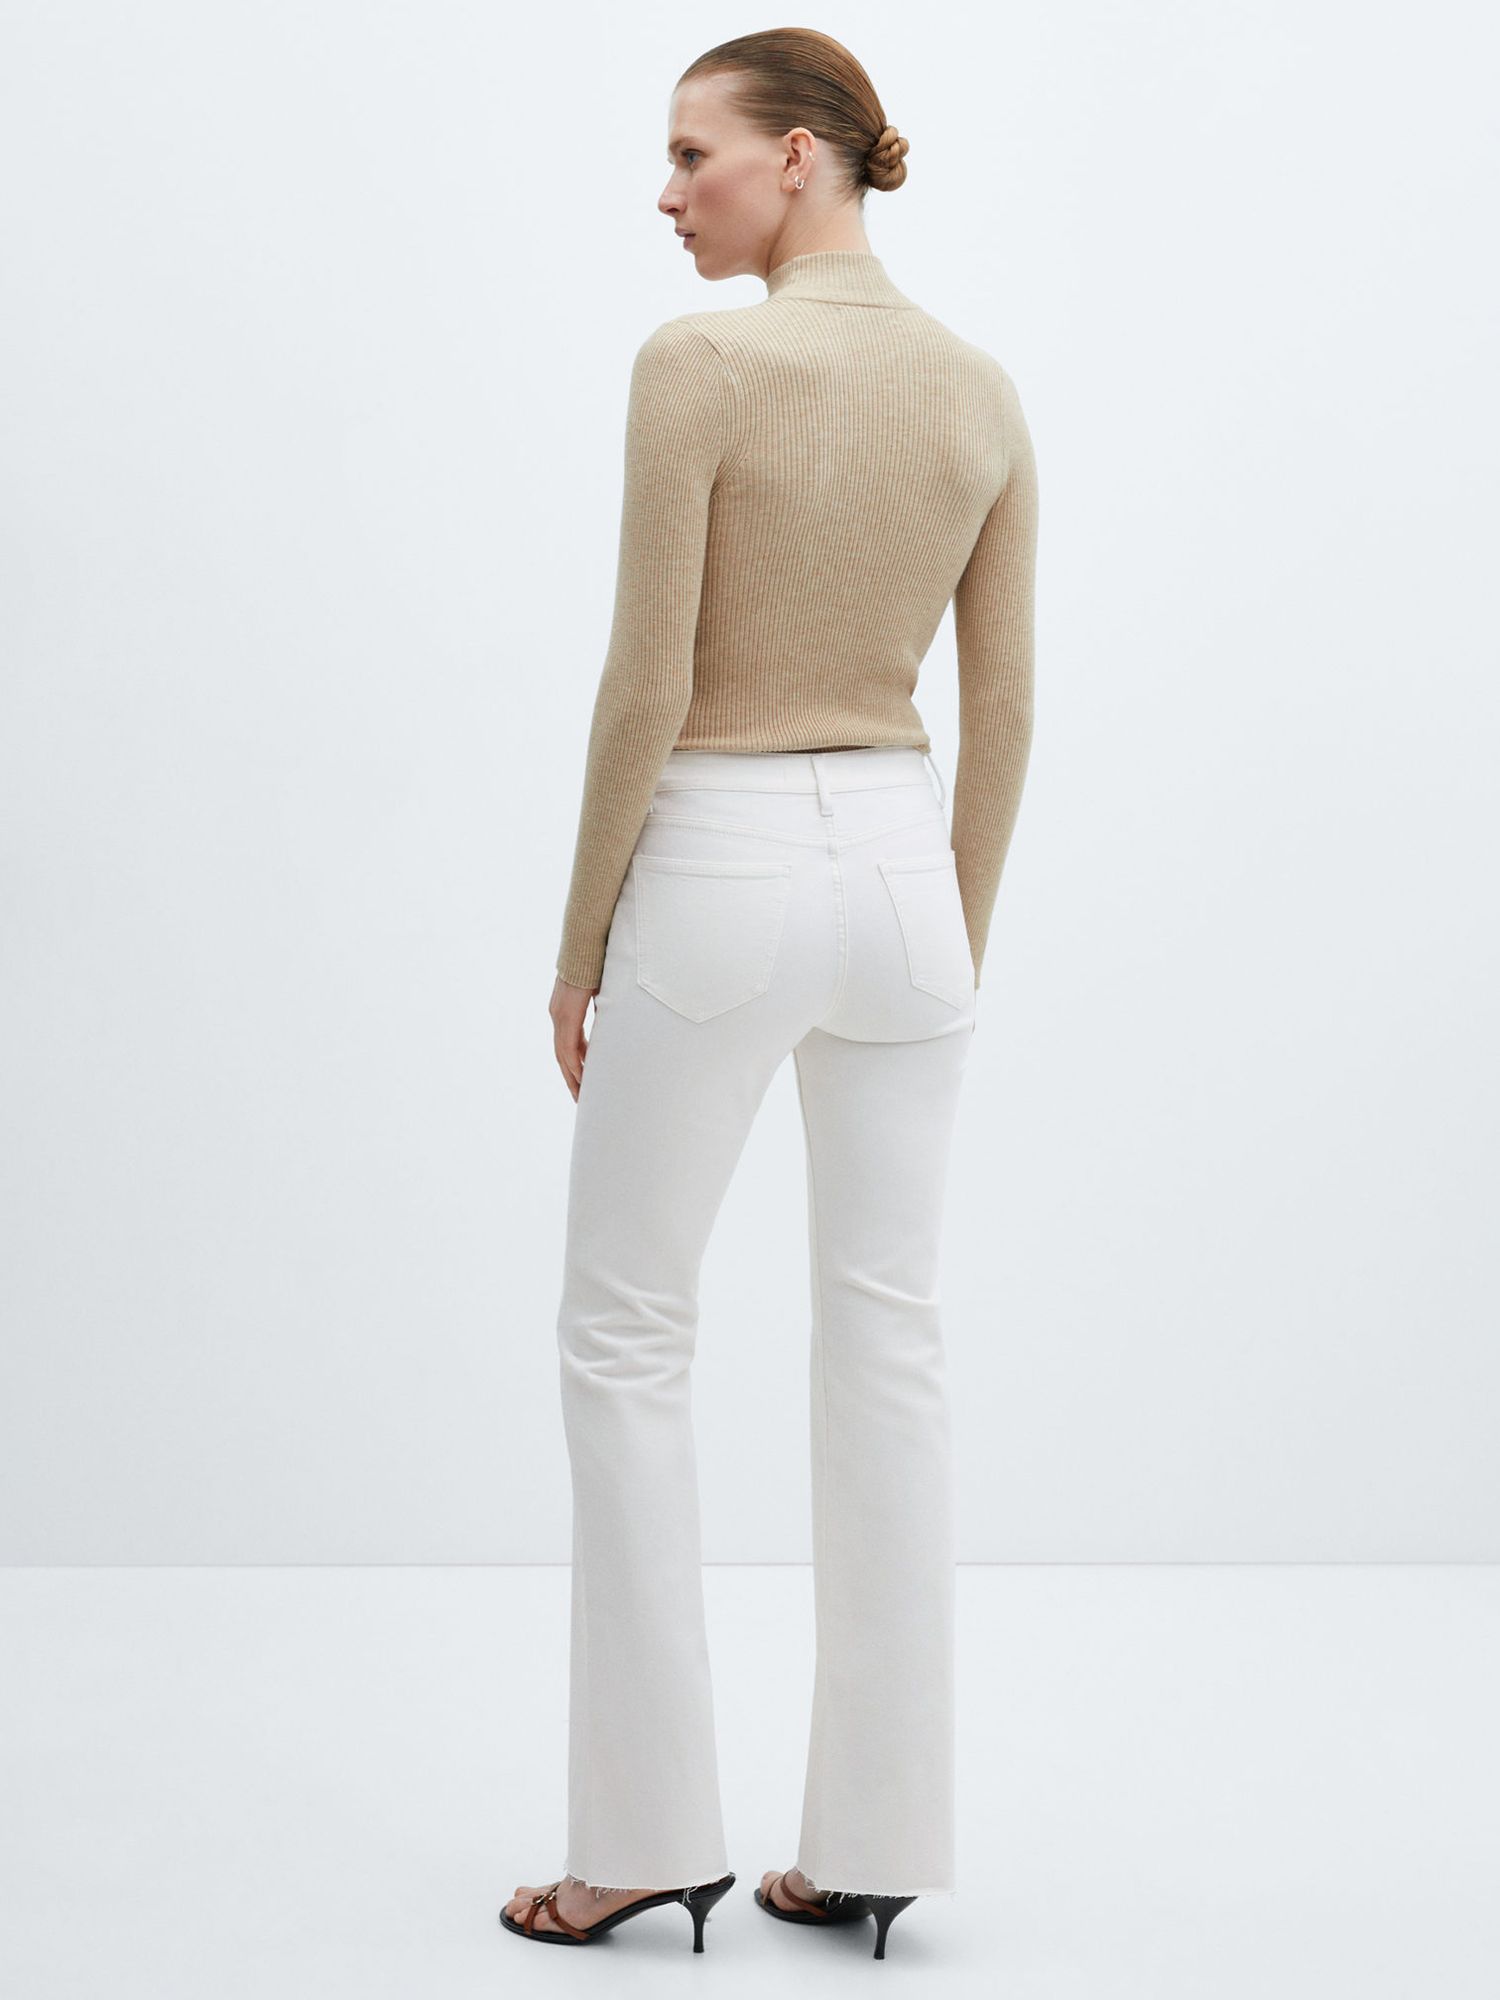 Buy Mango Fiona Flared Jeans, White Online at johnlewis.com